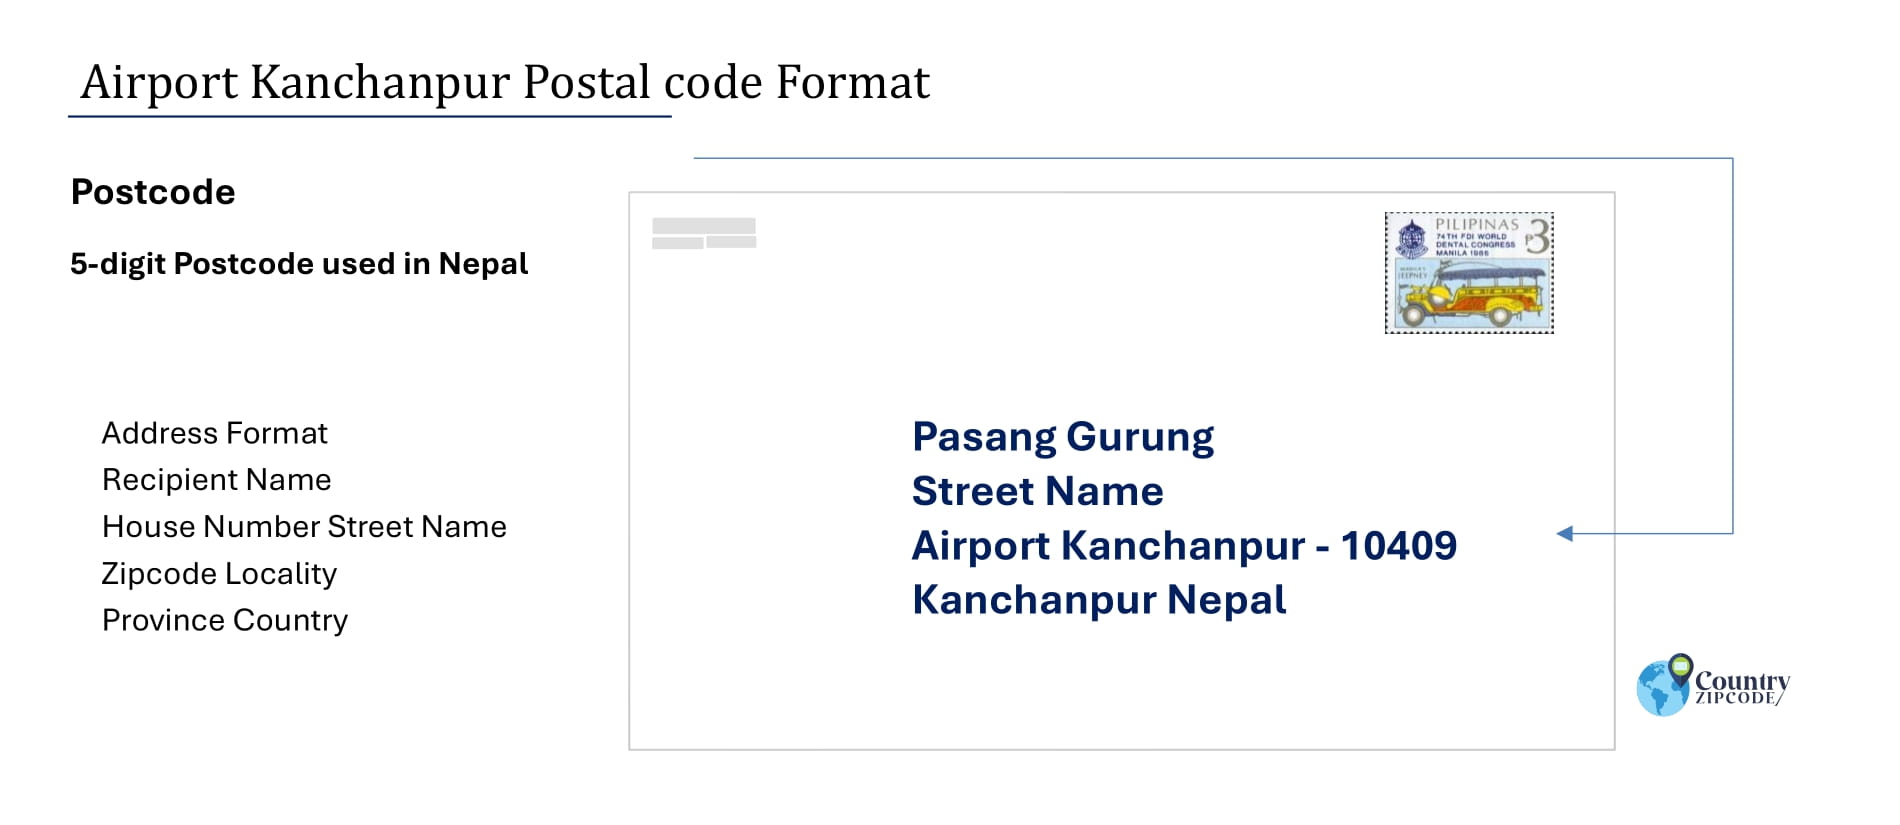 example of Airport Kanchanpur Nepal Postal code and address format